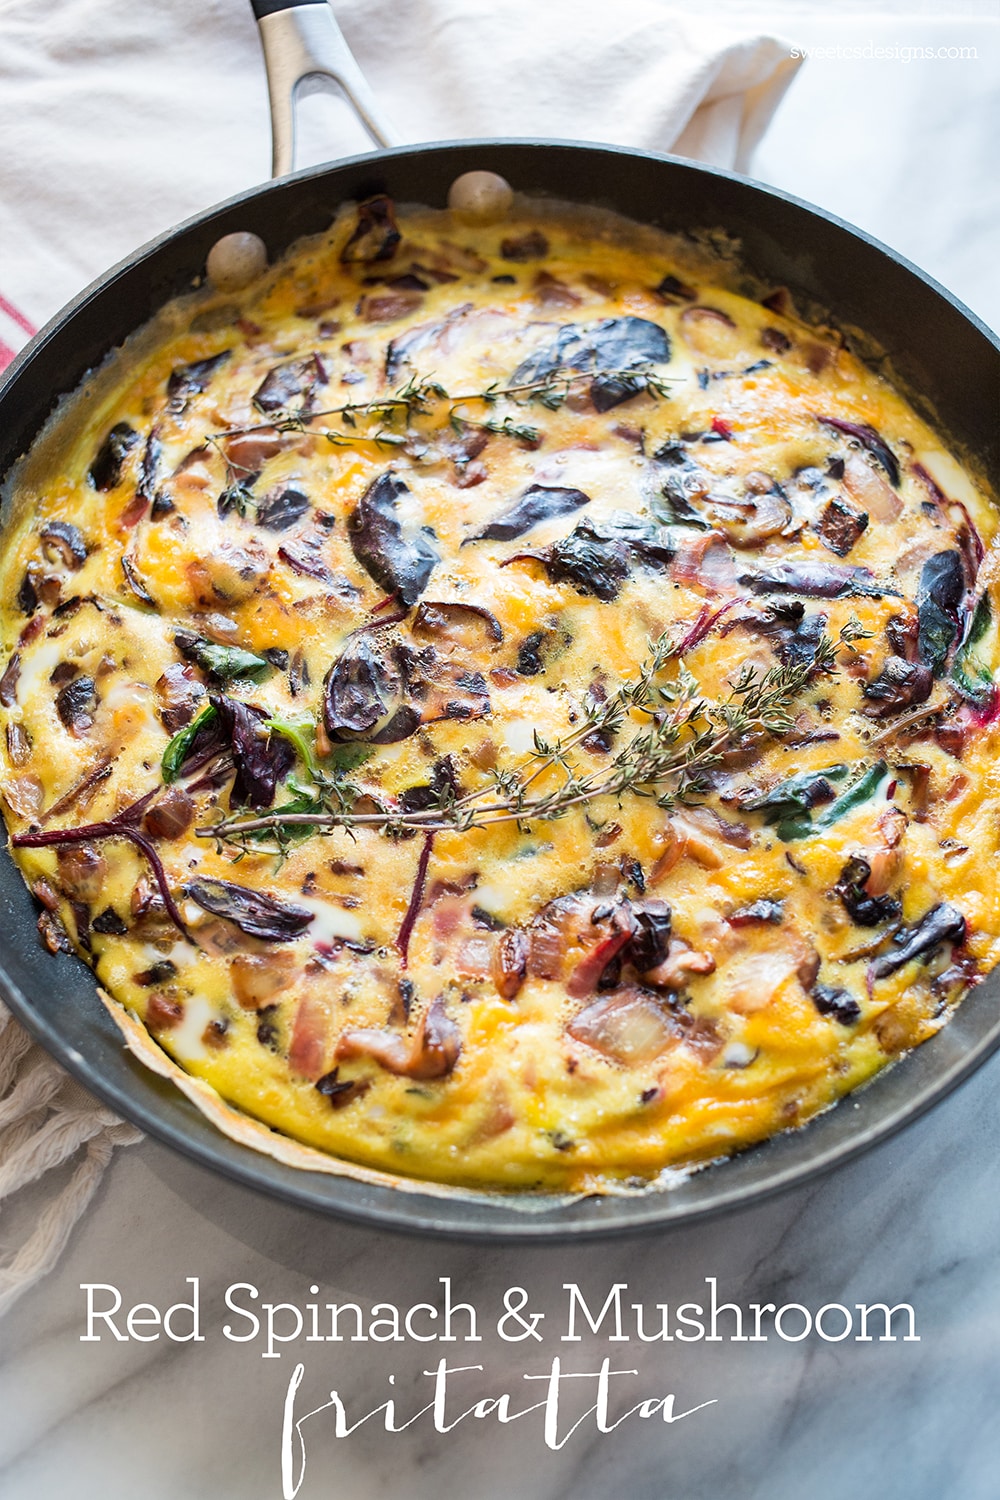 this fritatta combines unique and colorful red spinach with mushrooms for a filling meat free breakfast!